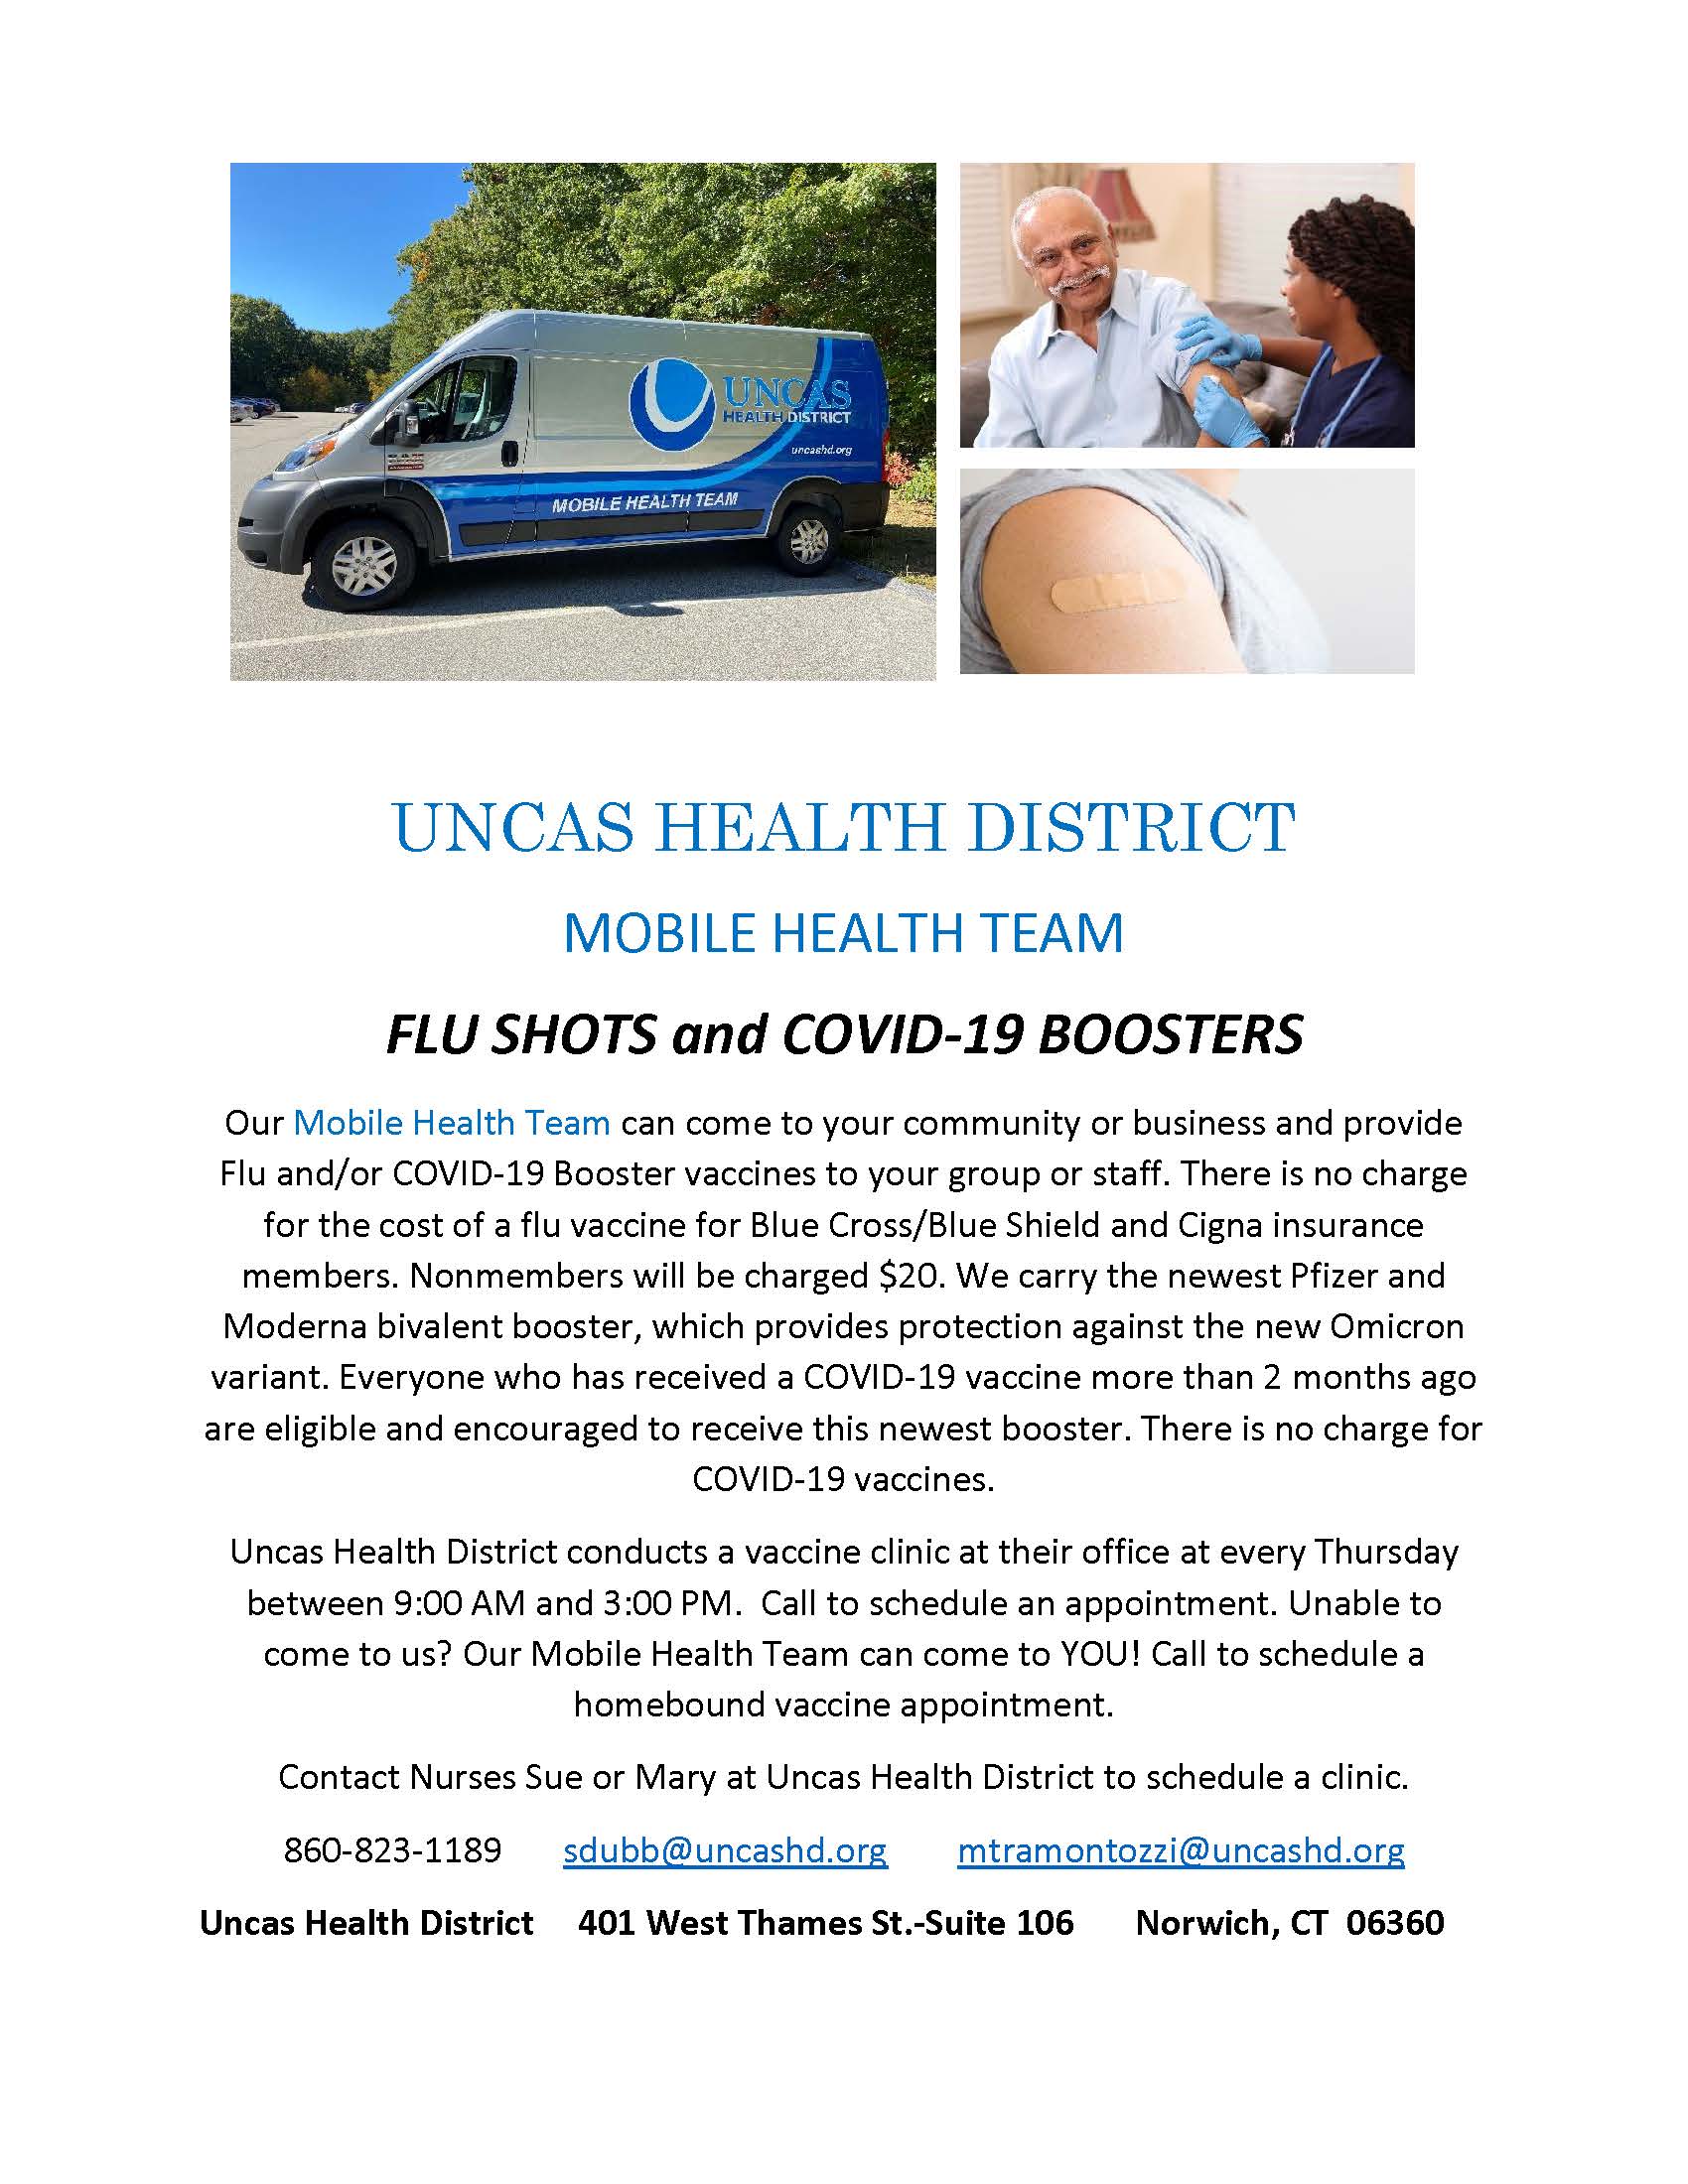 UHD clinic flyer for public Oct 2022